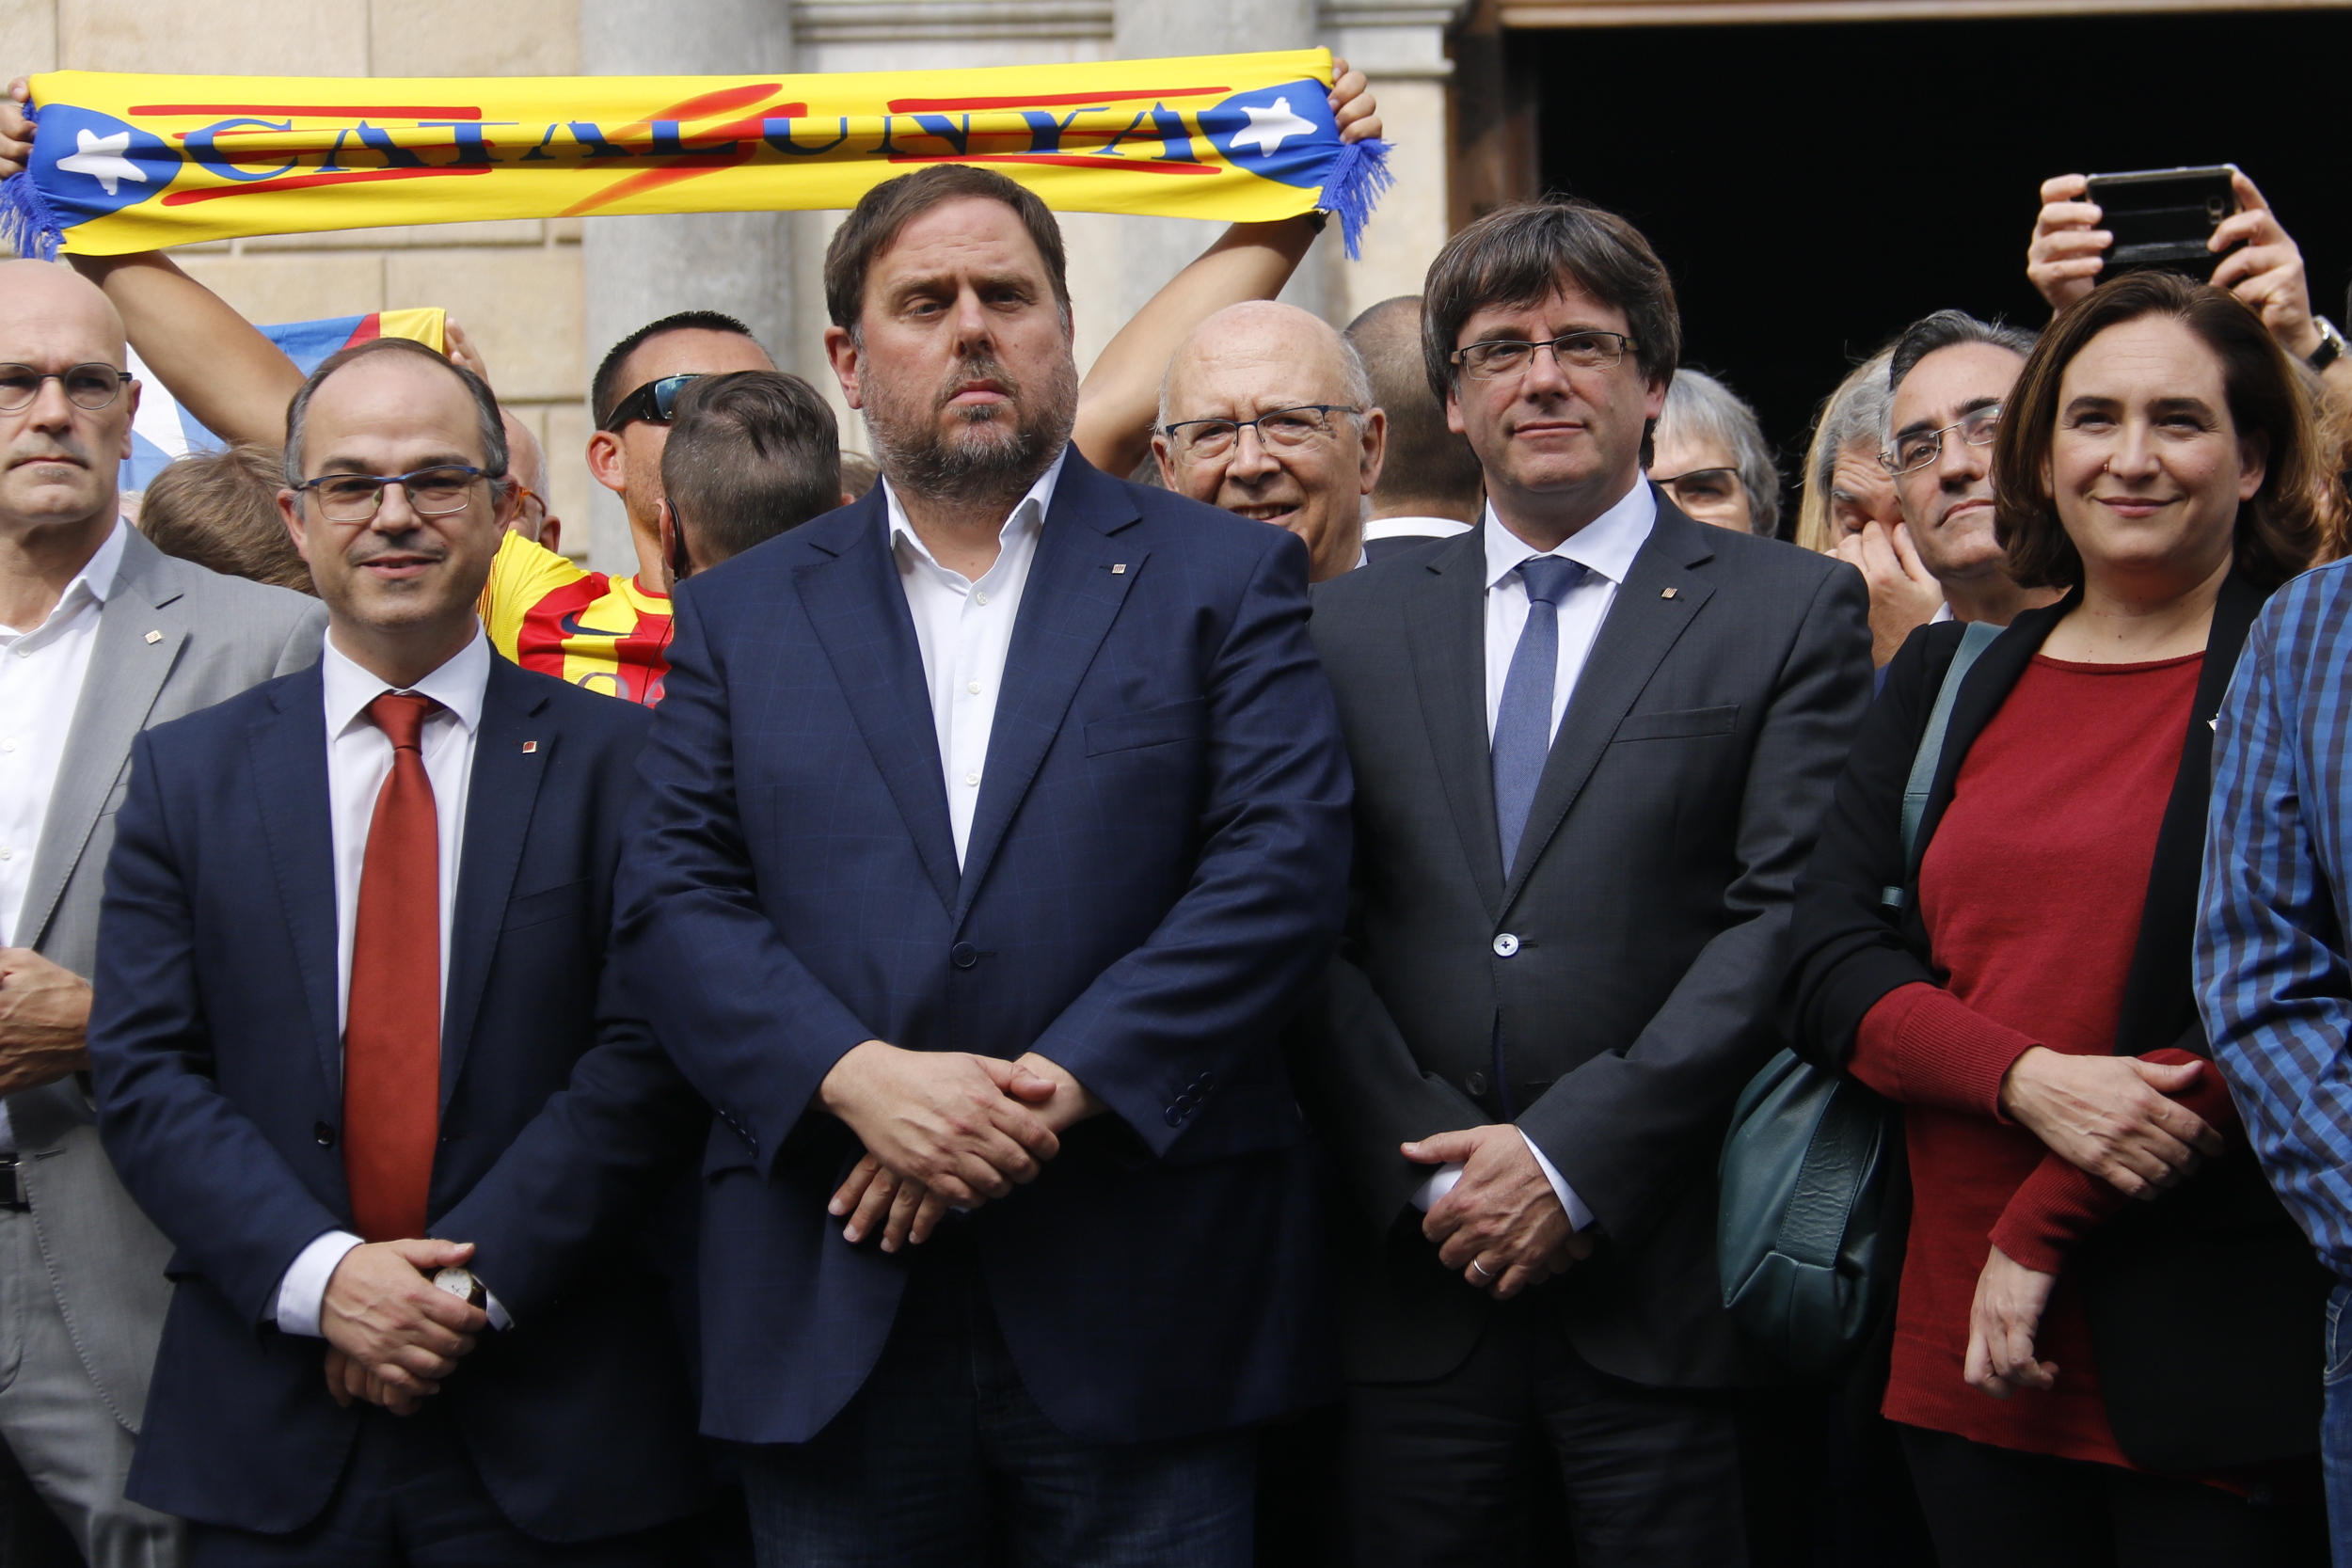 The president of the Generalitat, Carles Puigdemont, the vice president, Oriol Junqueras, the counselor Jordi Turull and the mayor of Barcelona, Ada Colau in Plaça Sant Jaume today (by ACN)